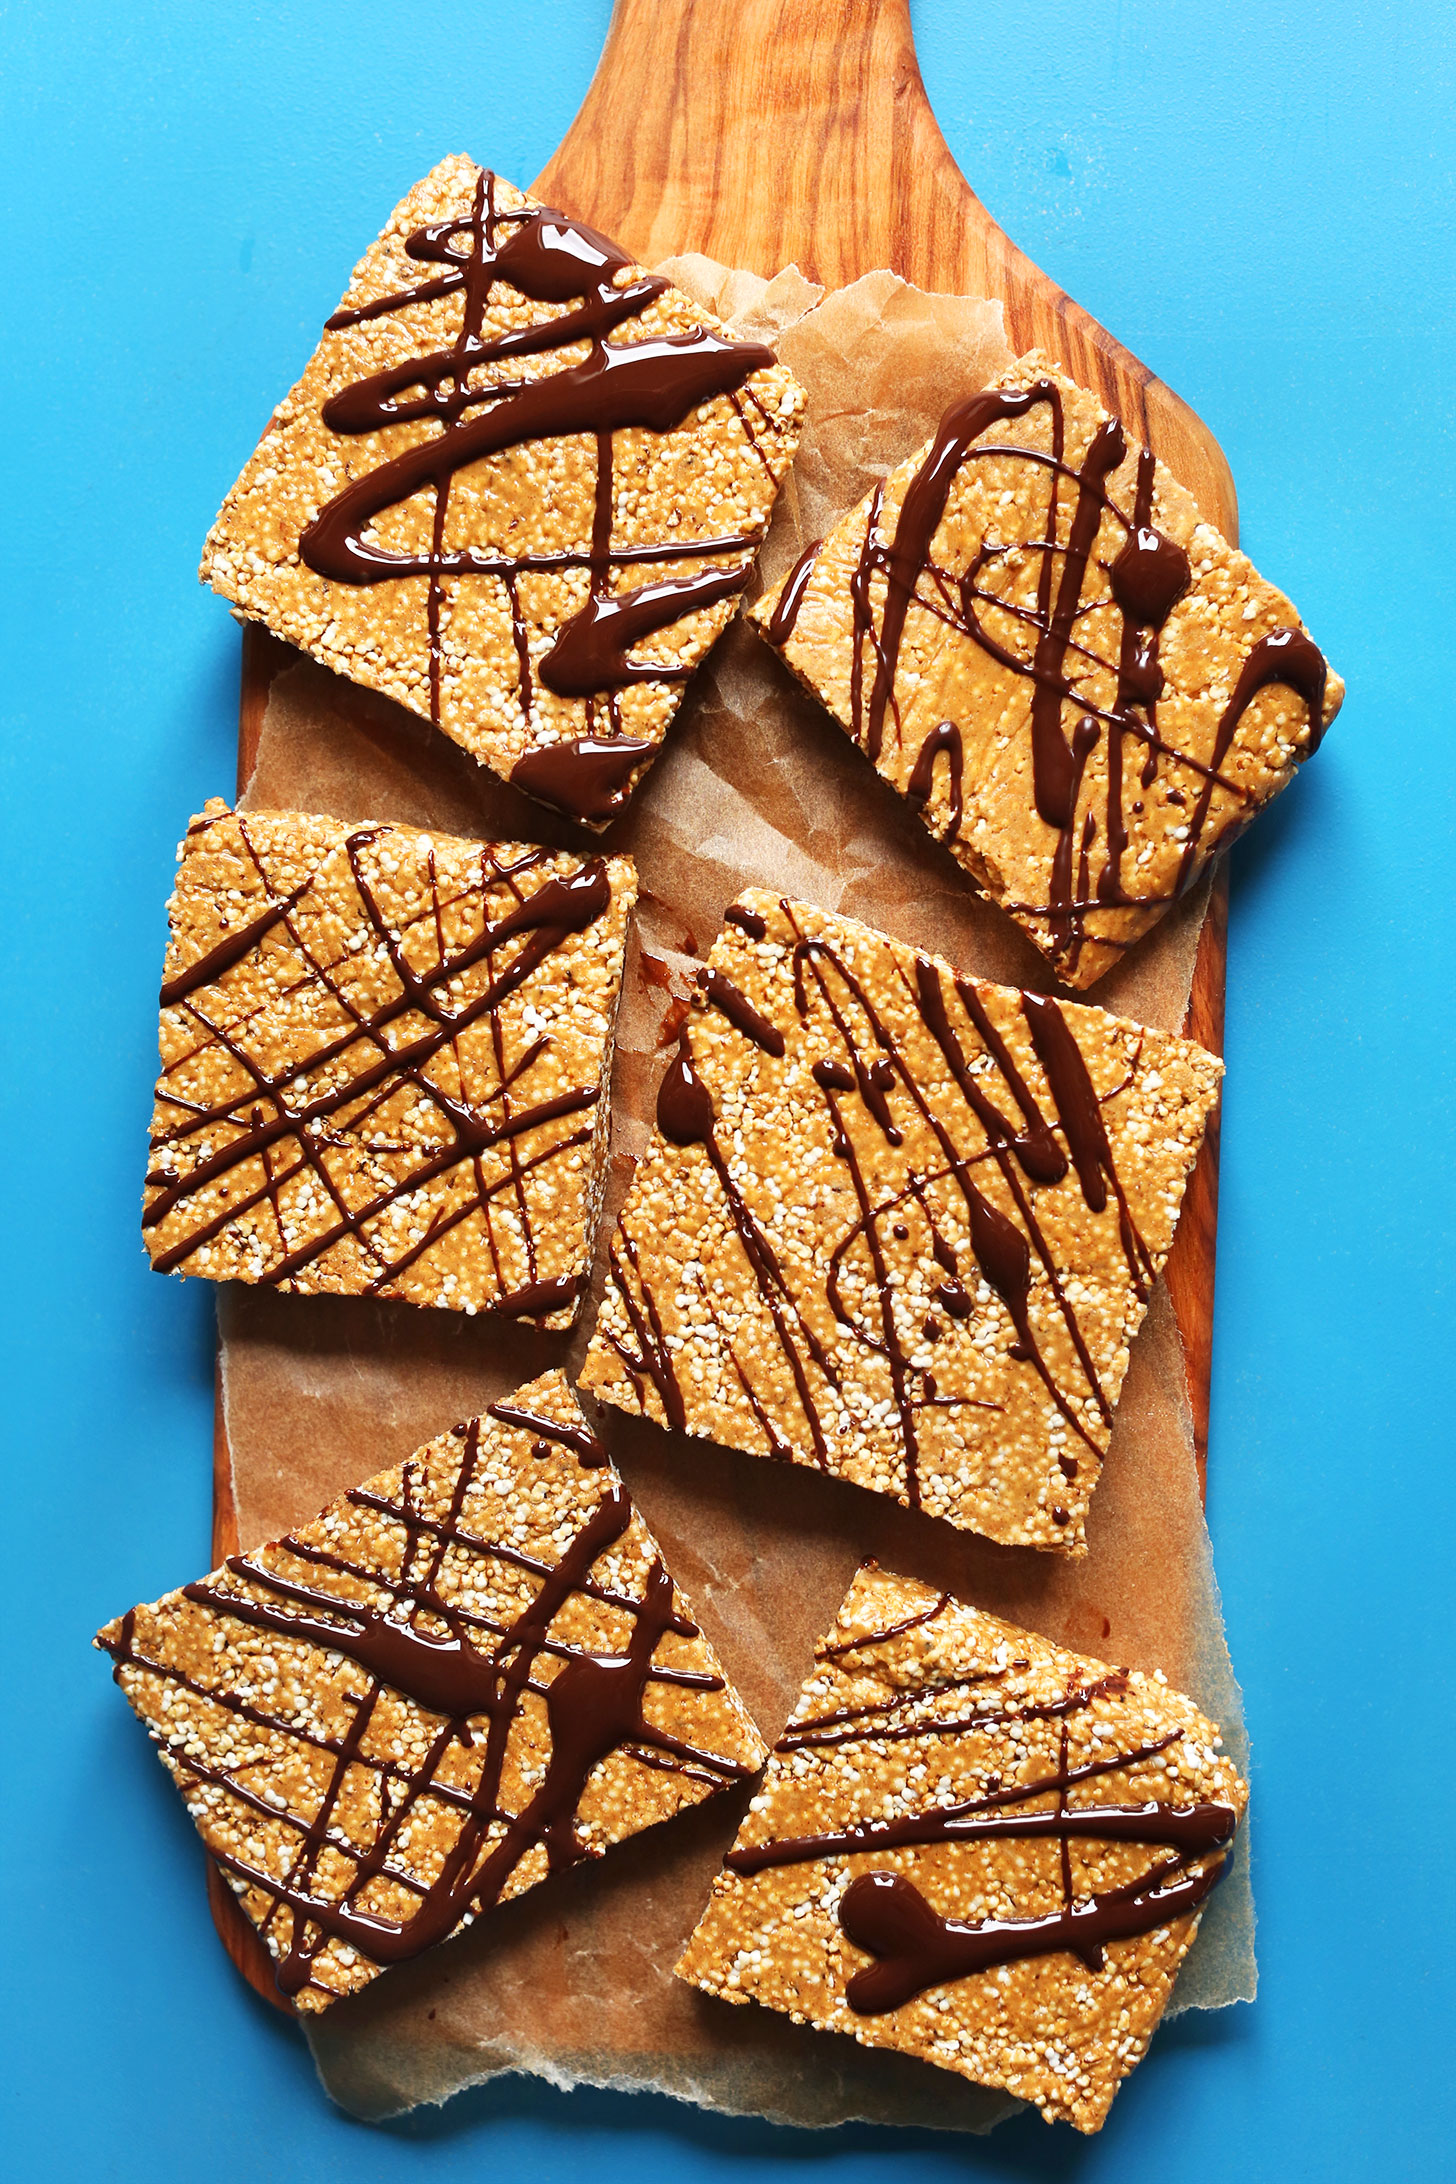 Wood cutting board with 6 squares of our Easy No Bake gluten-free Vegan Protein Bars recipe